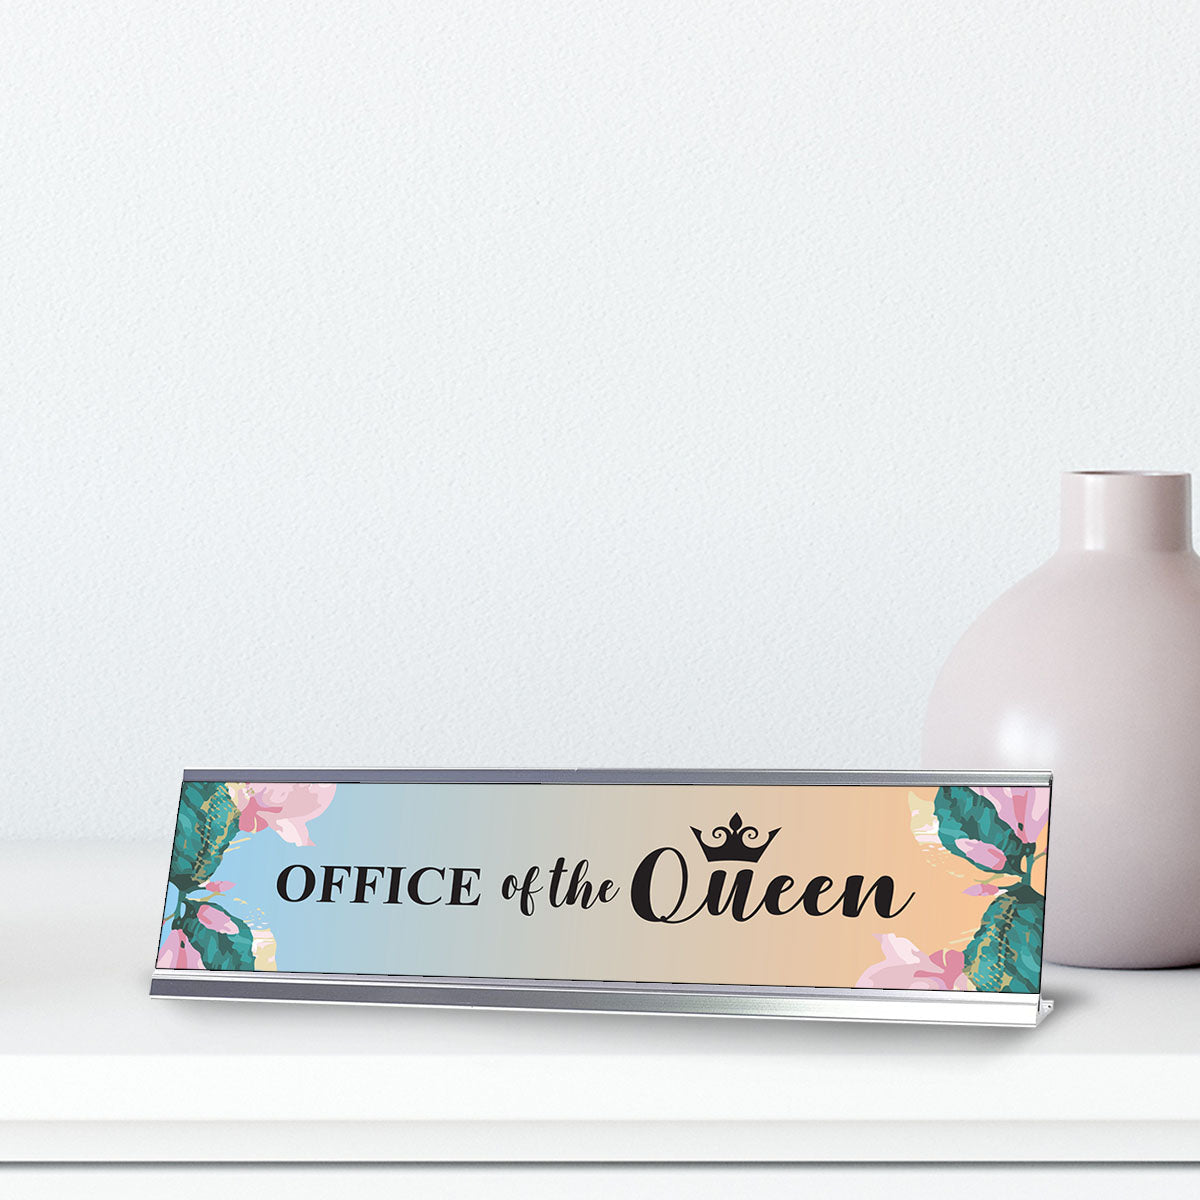 Office of the Queen, Floral Designer Series Desk Sign Nameplate (2 x 8")